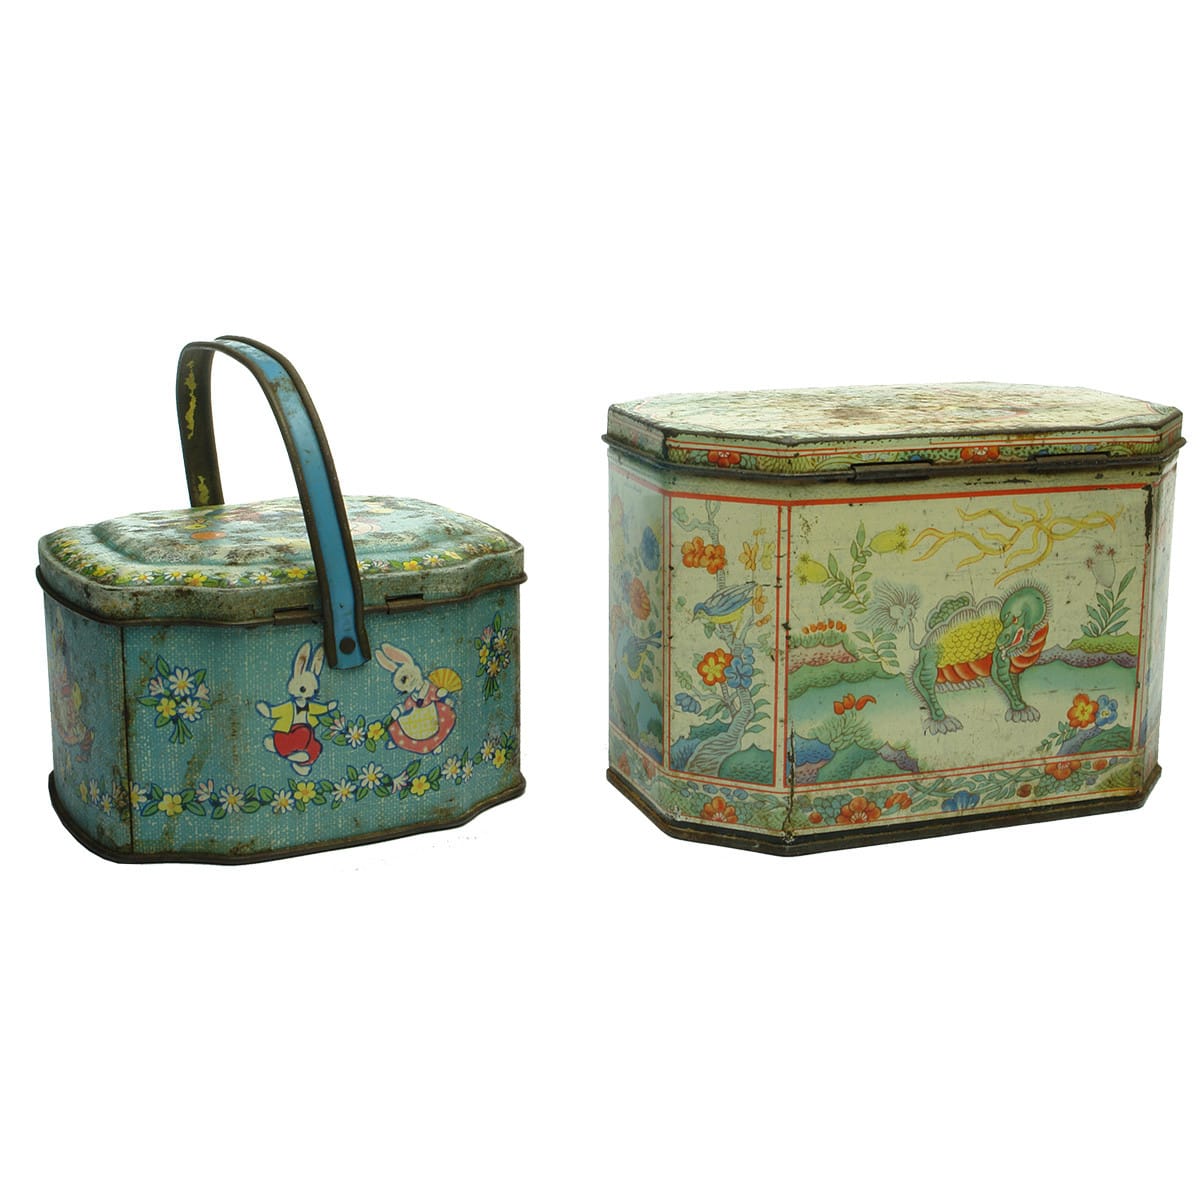 Tins. Handled tin with ducks for Boy Blue Assortment of Toffees, 8 oz.; Huntley & Palmers Biscuits tin with Oriental Scenes. (United Kingdom)